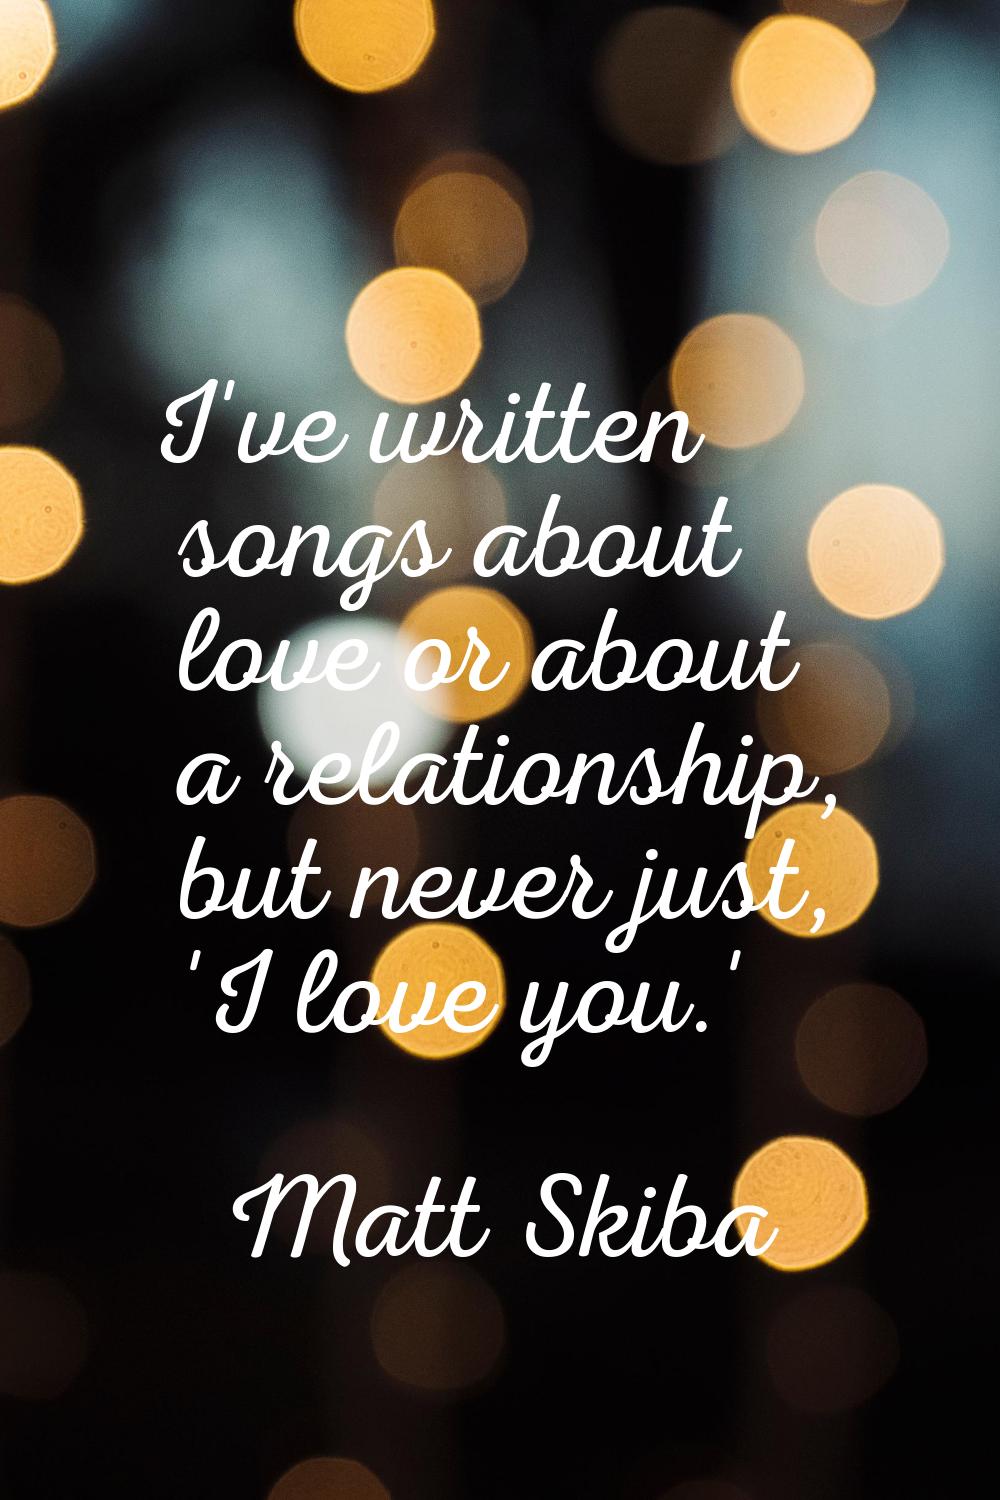 I've written songs about love or about a relationship, but never just, 'I love you.'